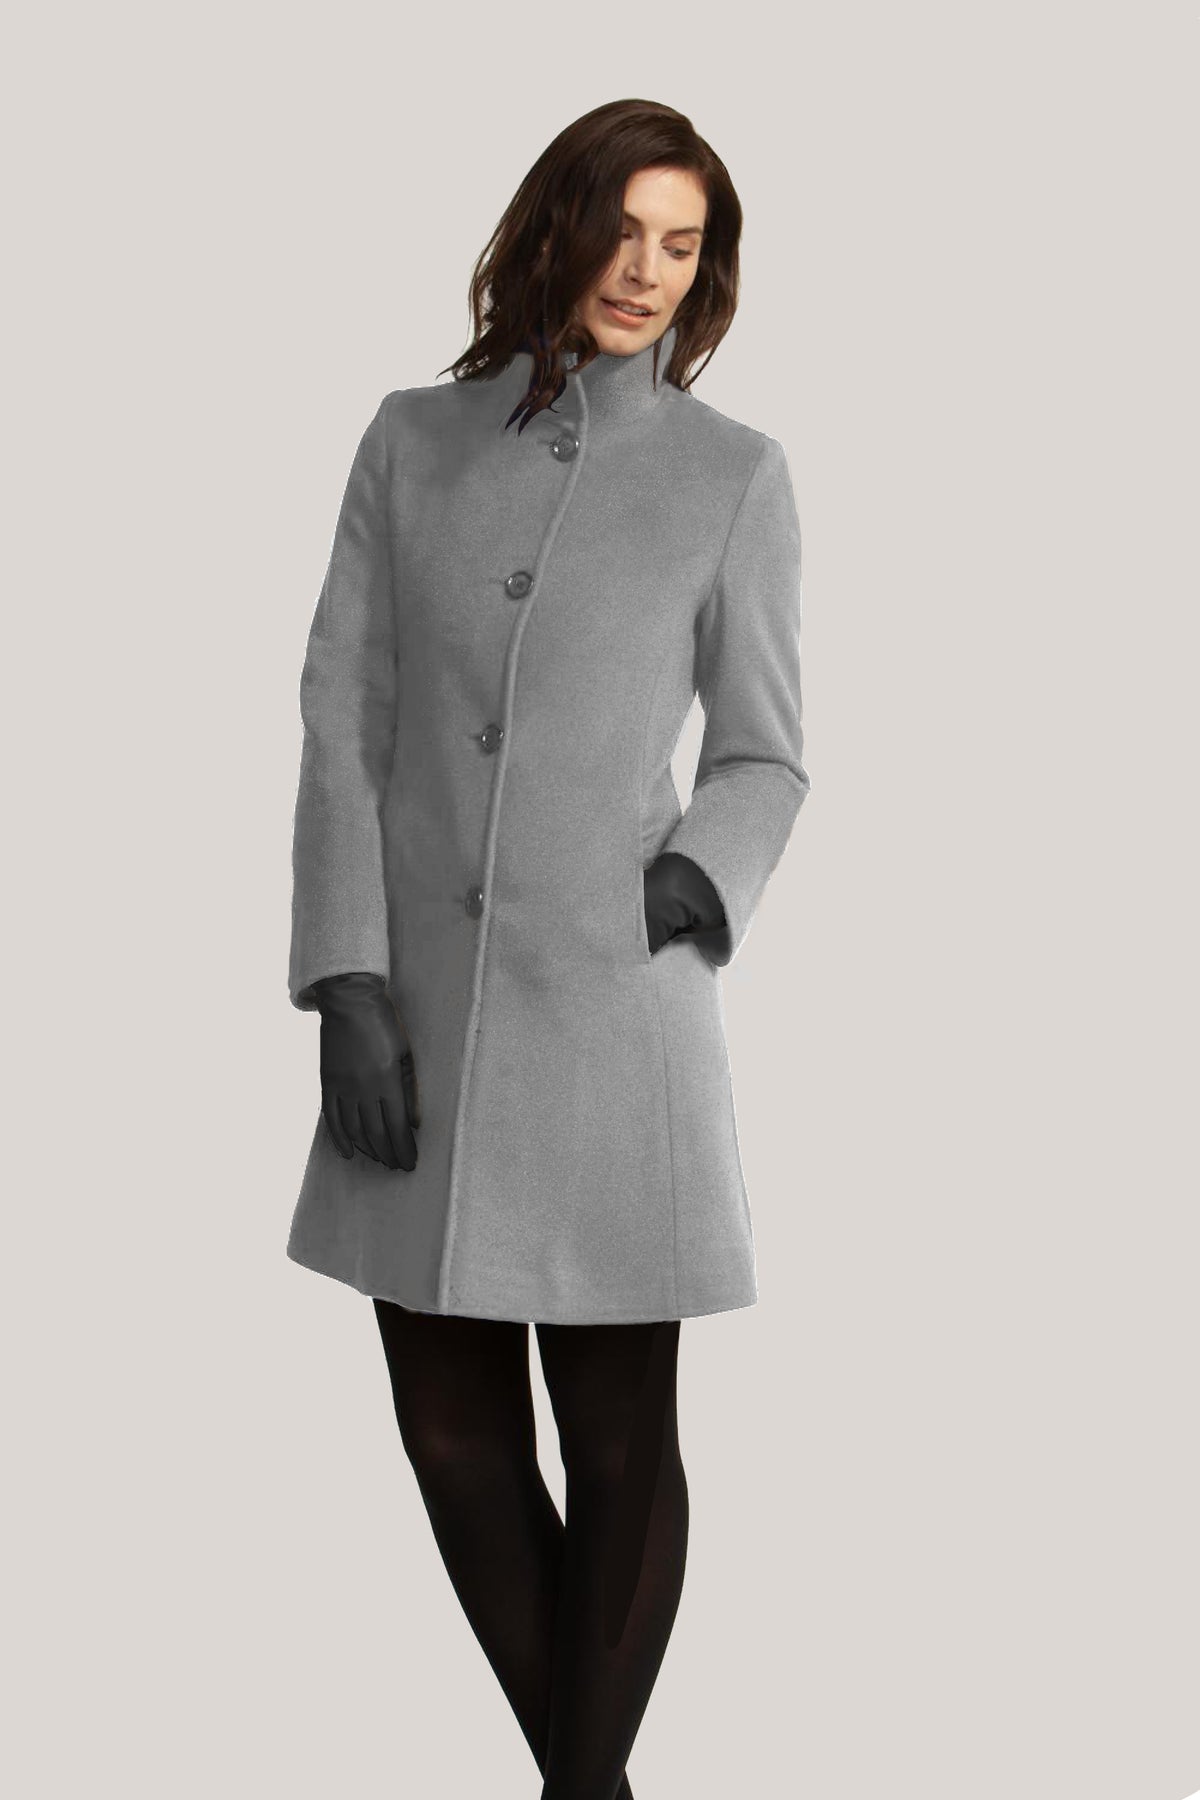 Made in Canada – Tagged Wool-Cashmere– LORNE'S COATS